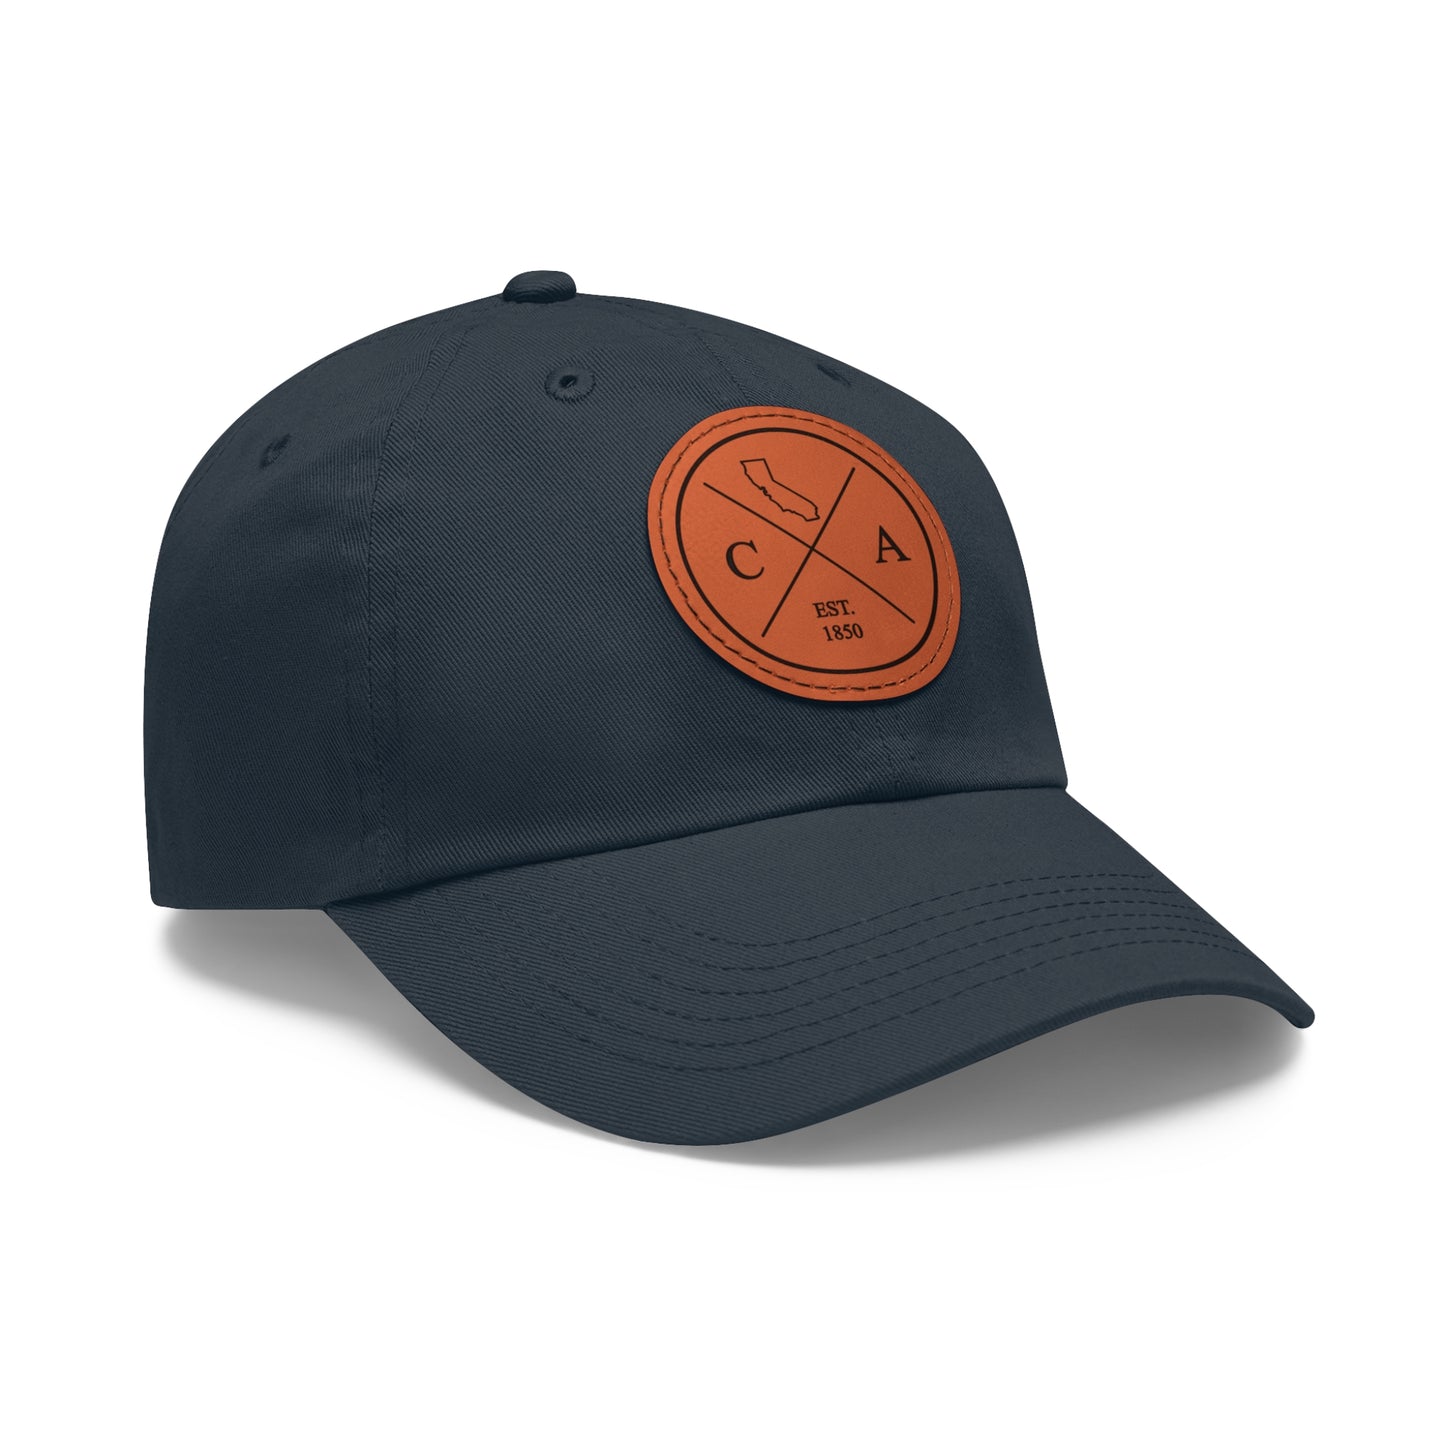 California Dad Hat with Leather Patch